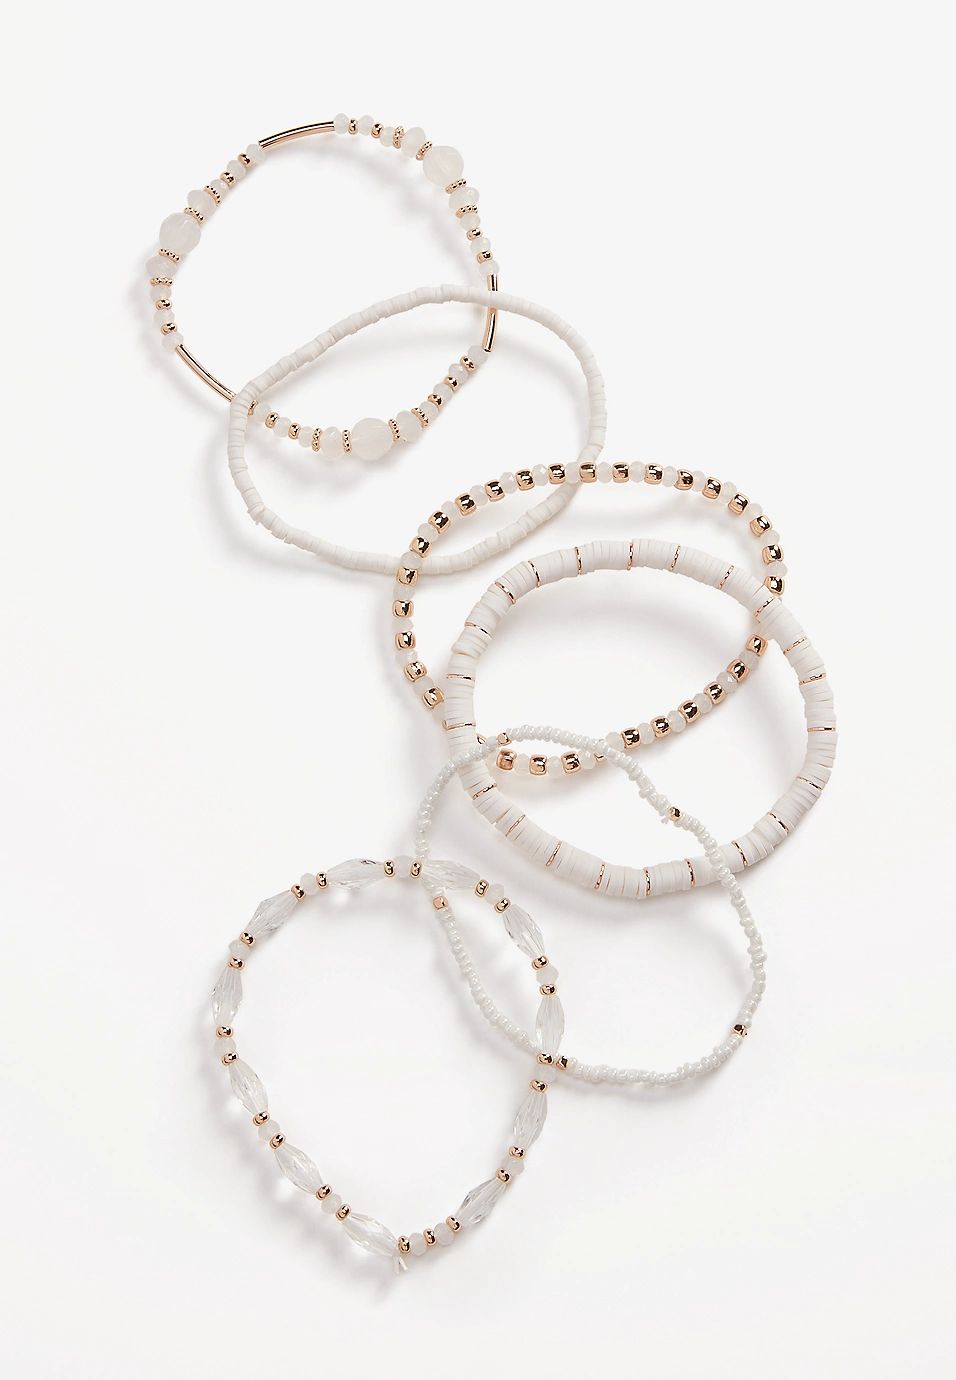 6 Piece White and Gold Beaded Stretch Bracelet Set | Maurices